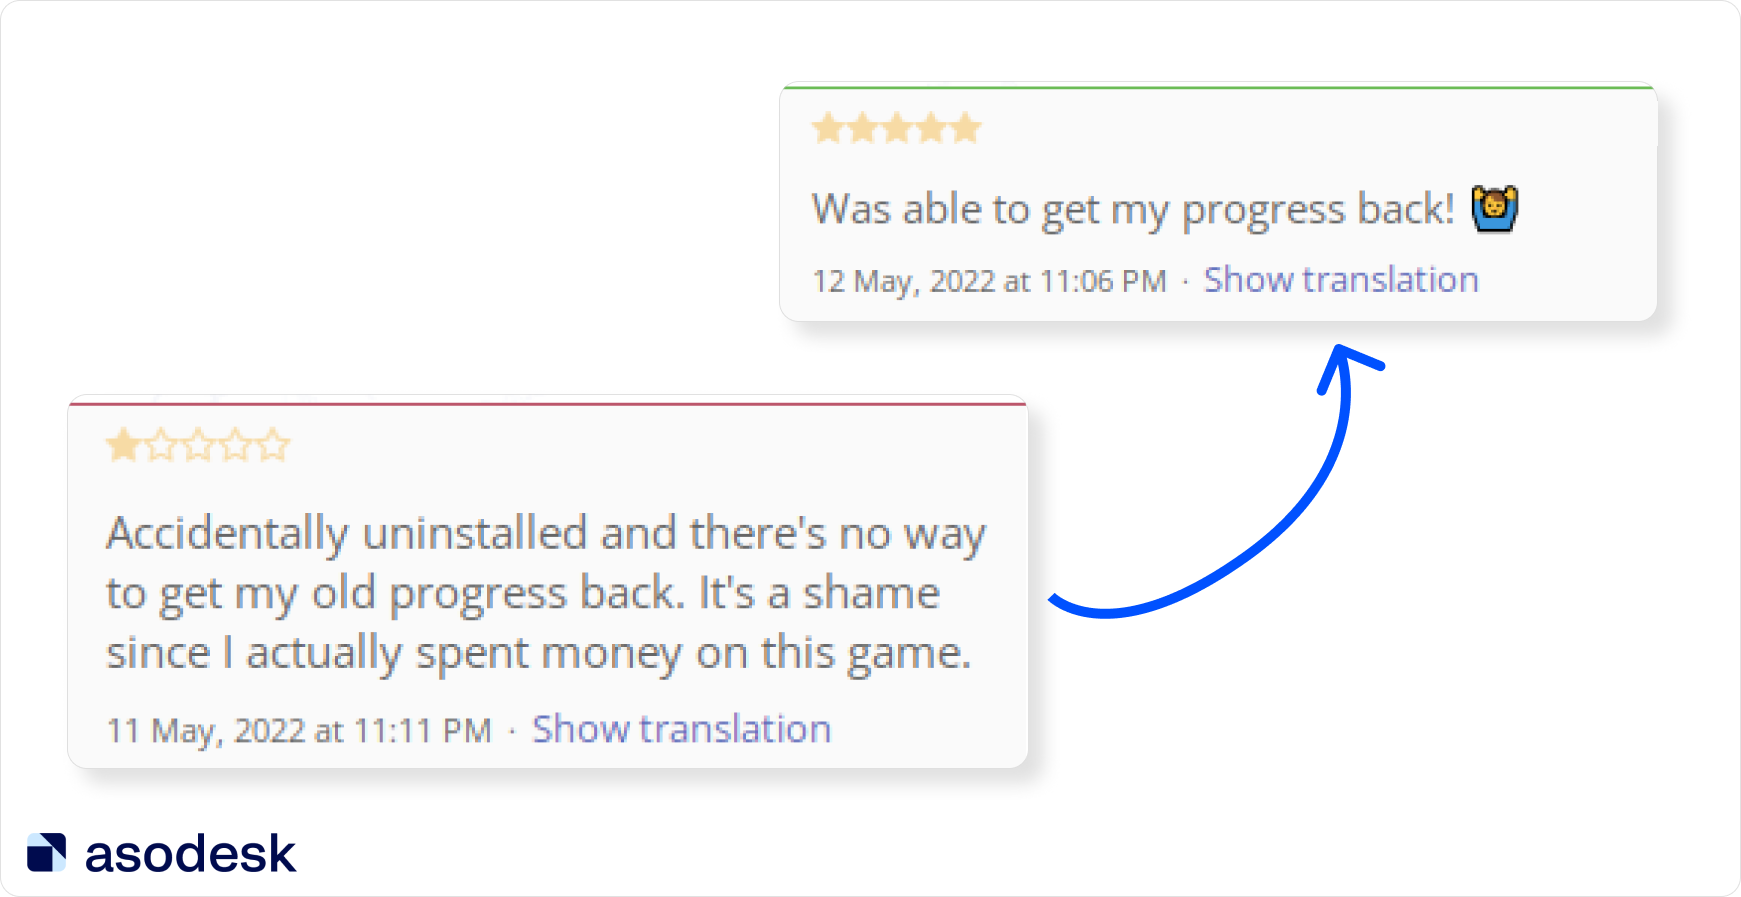 If you notice users’ problems quickly and fix bugs in the app, users can improve their reviews